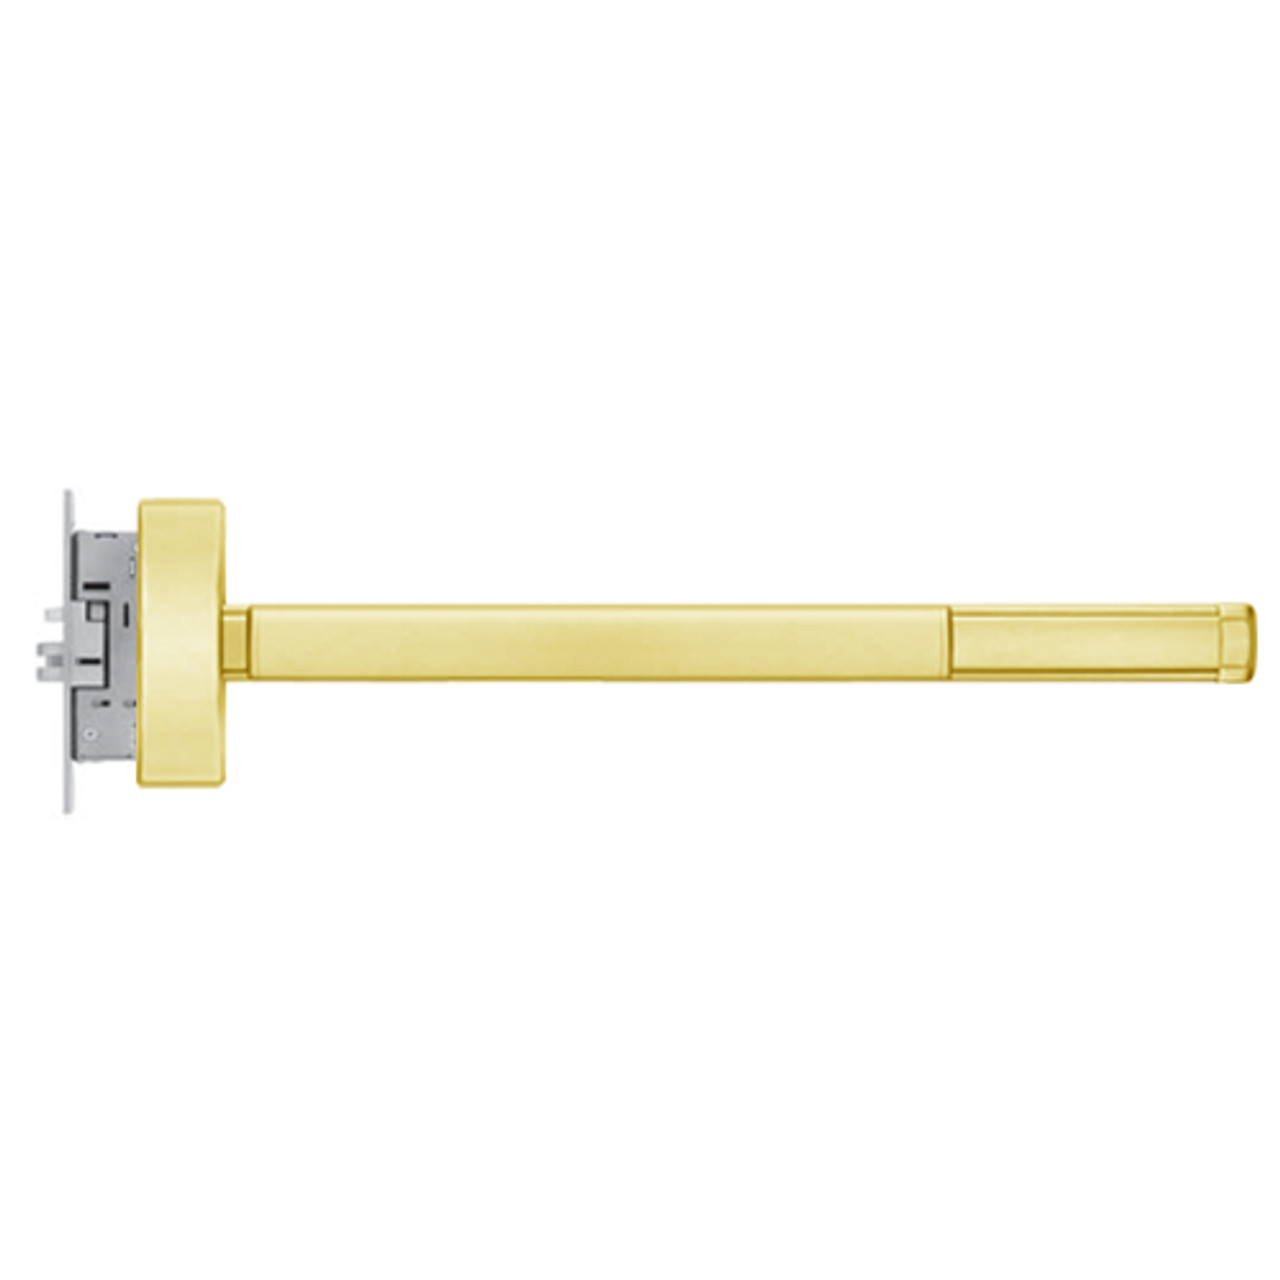 MLR2314-LHR-605-36 PHI 2300 Series Apex Mortise Exit Device with Motorized Latch Retraction Prepped for Lever-Knob Always Active in Bright Brass Finish